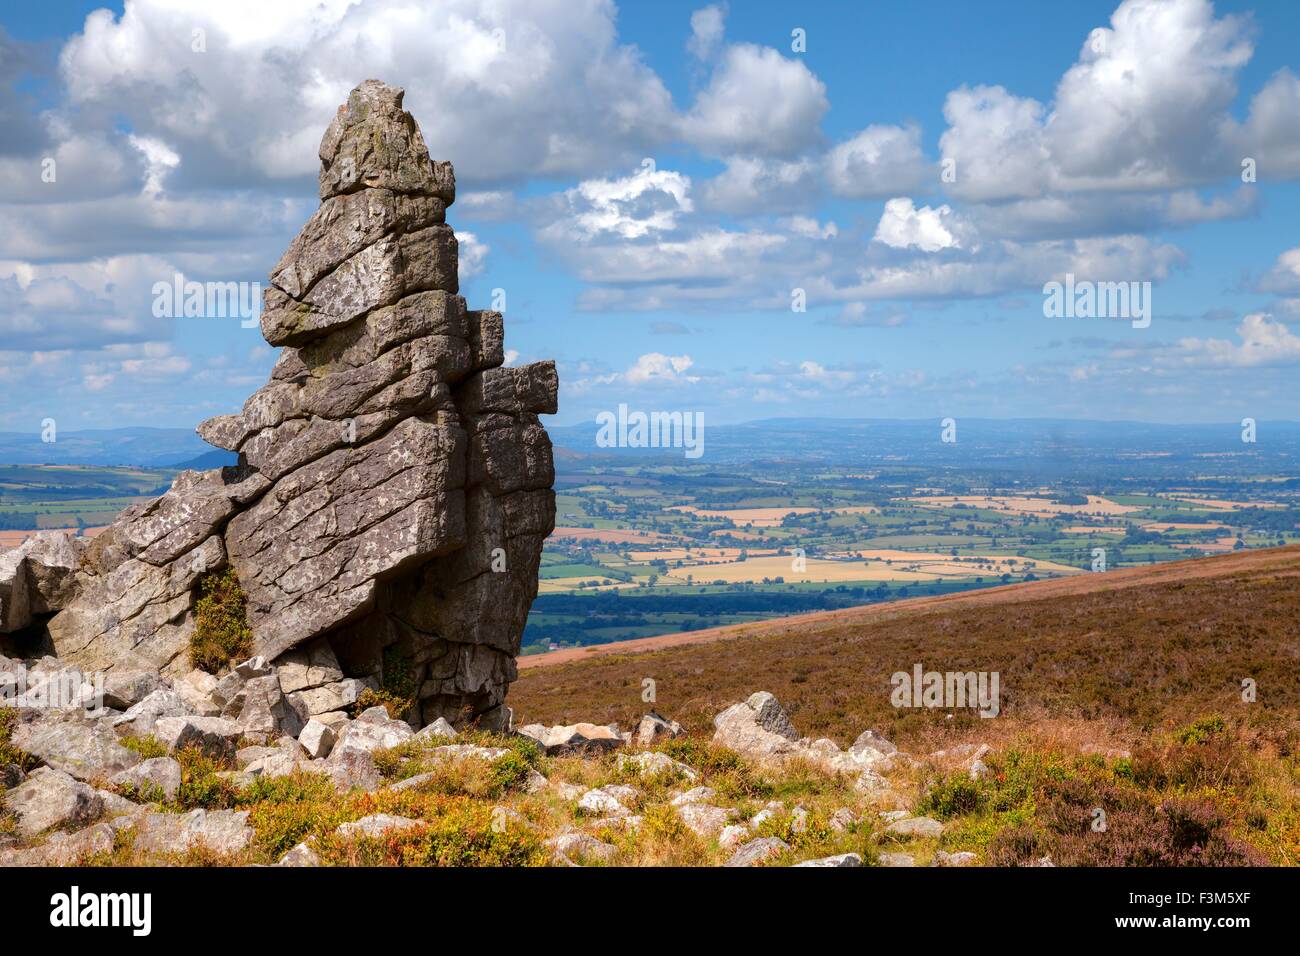 Rocky outcrop at Stiperstones, Shropshire, England. Stock Photo